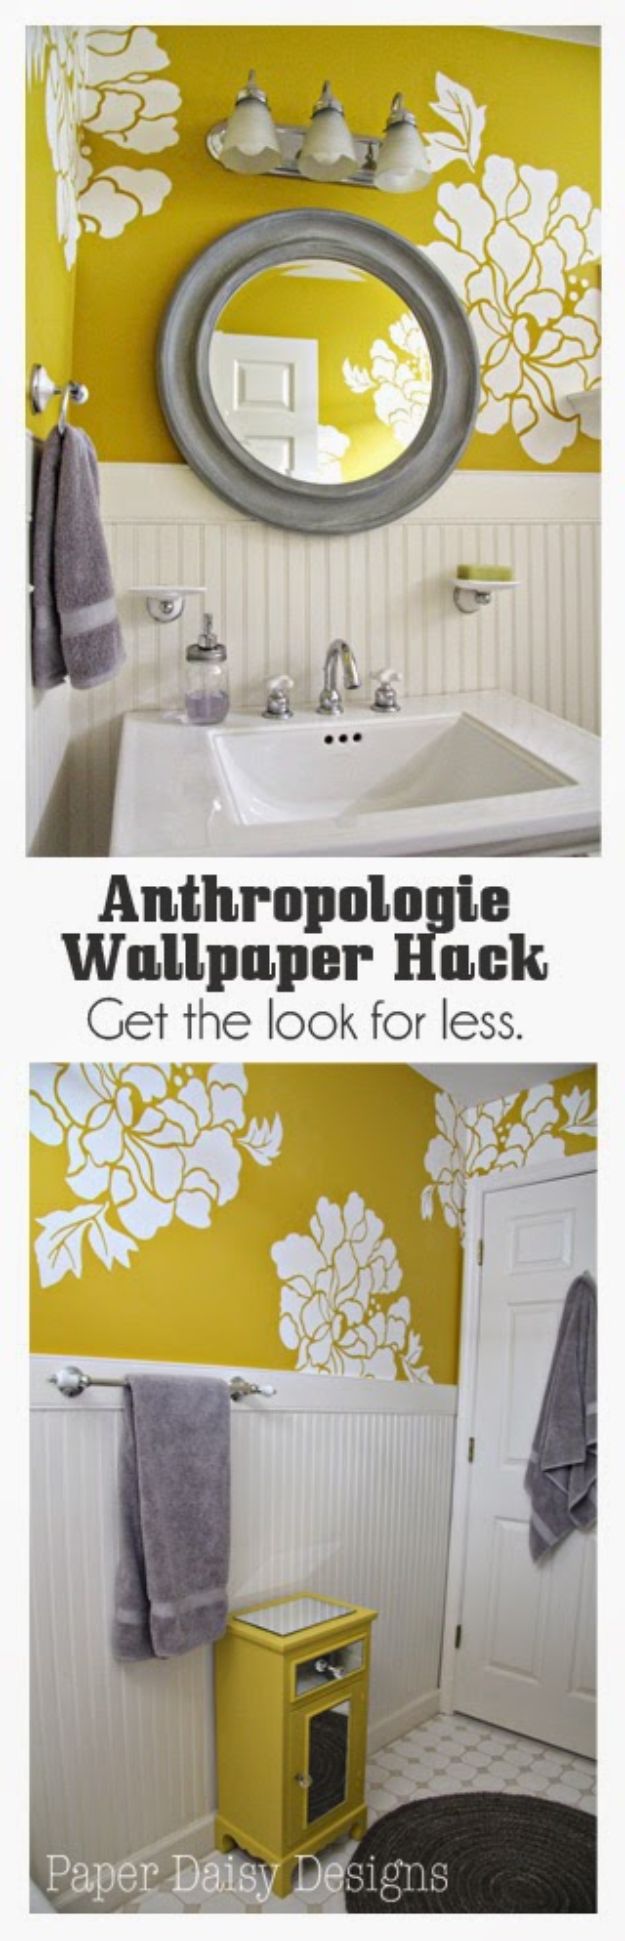 Anthropologie DIY Hacks, Clothes, Sewing Projects and Jewelry Fashion - Pillows, Bedding and Curtains - Tables and furniture - Mugs and Kitchen Decorations - DIY Room Decor and Cool Ideas for the Home | Anthropologie Wallpaper Hack 